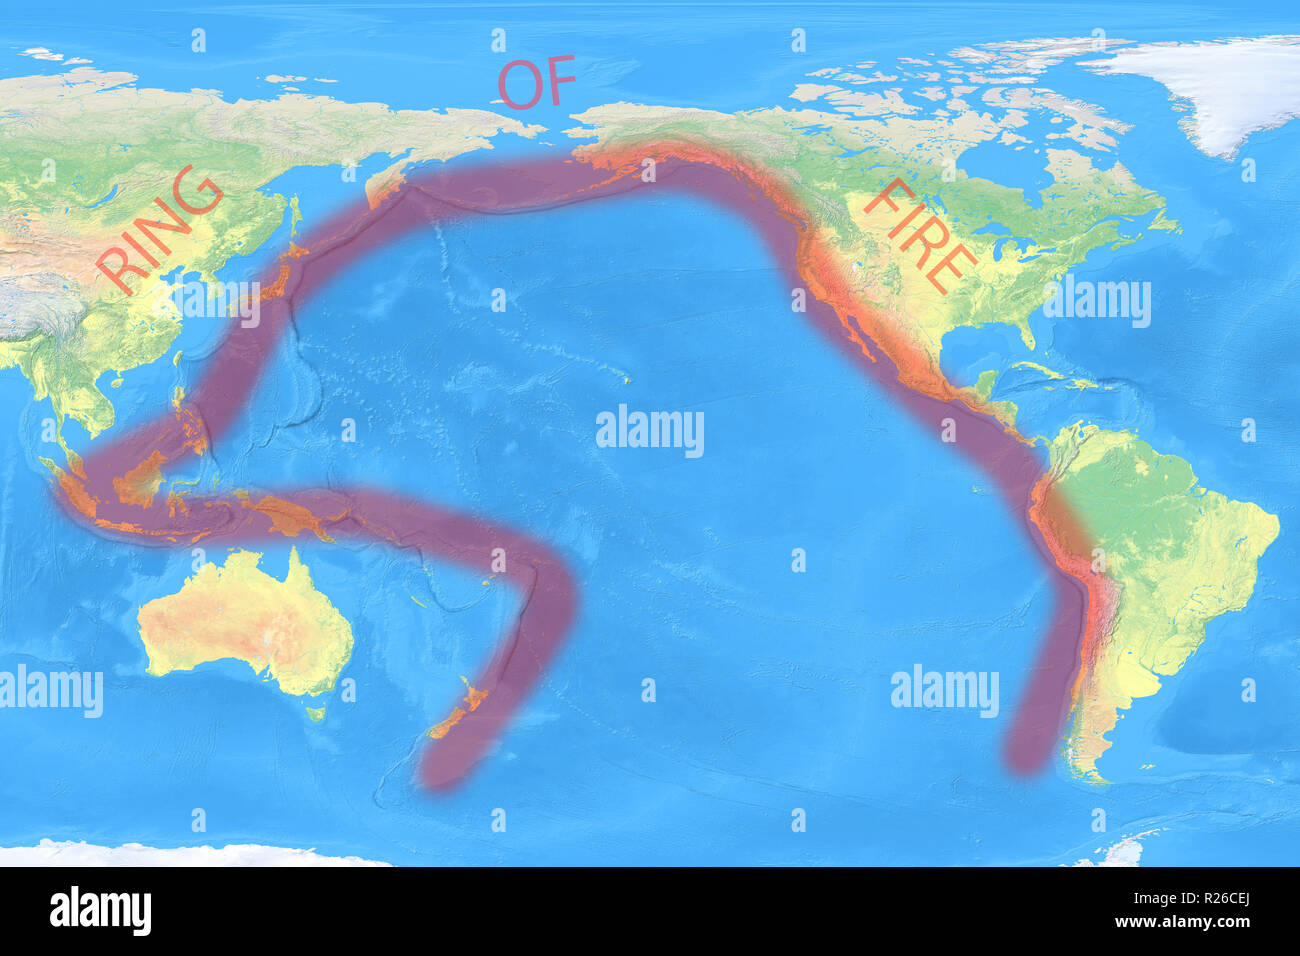 why are volcanoes distributed around in this ring (ring of fire) formation  around the pacific ocean? : r/geography